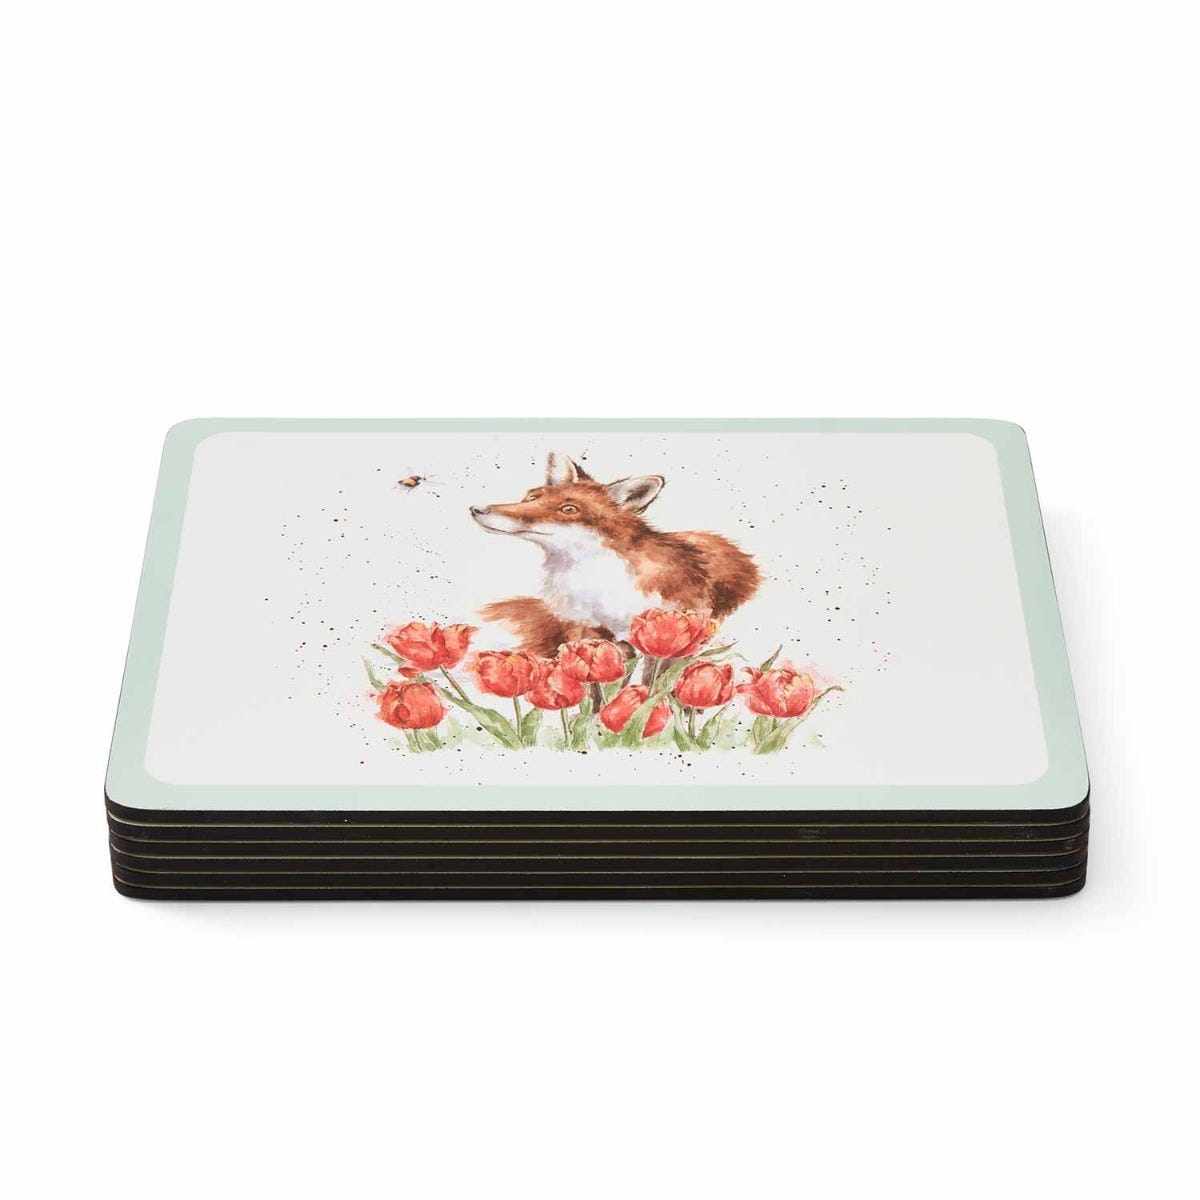 Pimpernel Wrendale Designs Bee Set of 6 Placemats